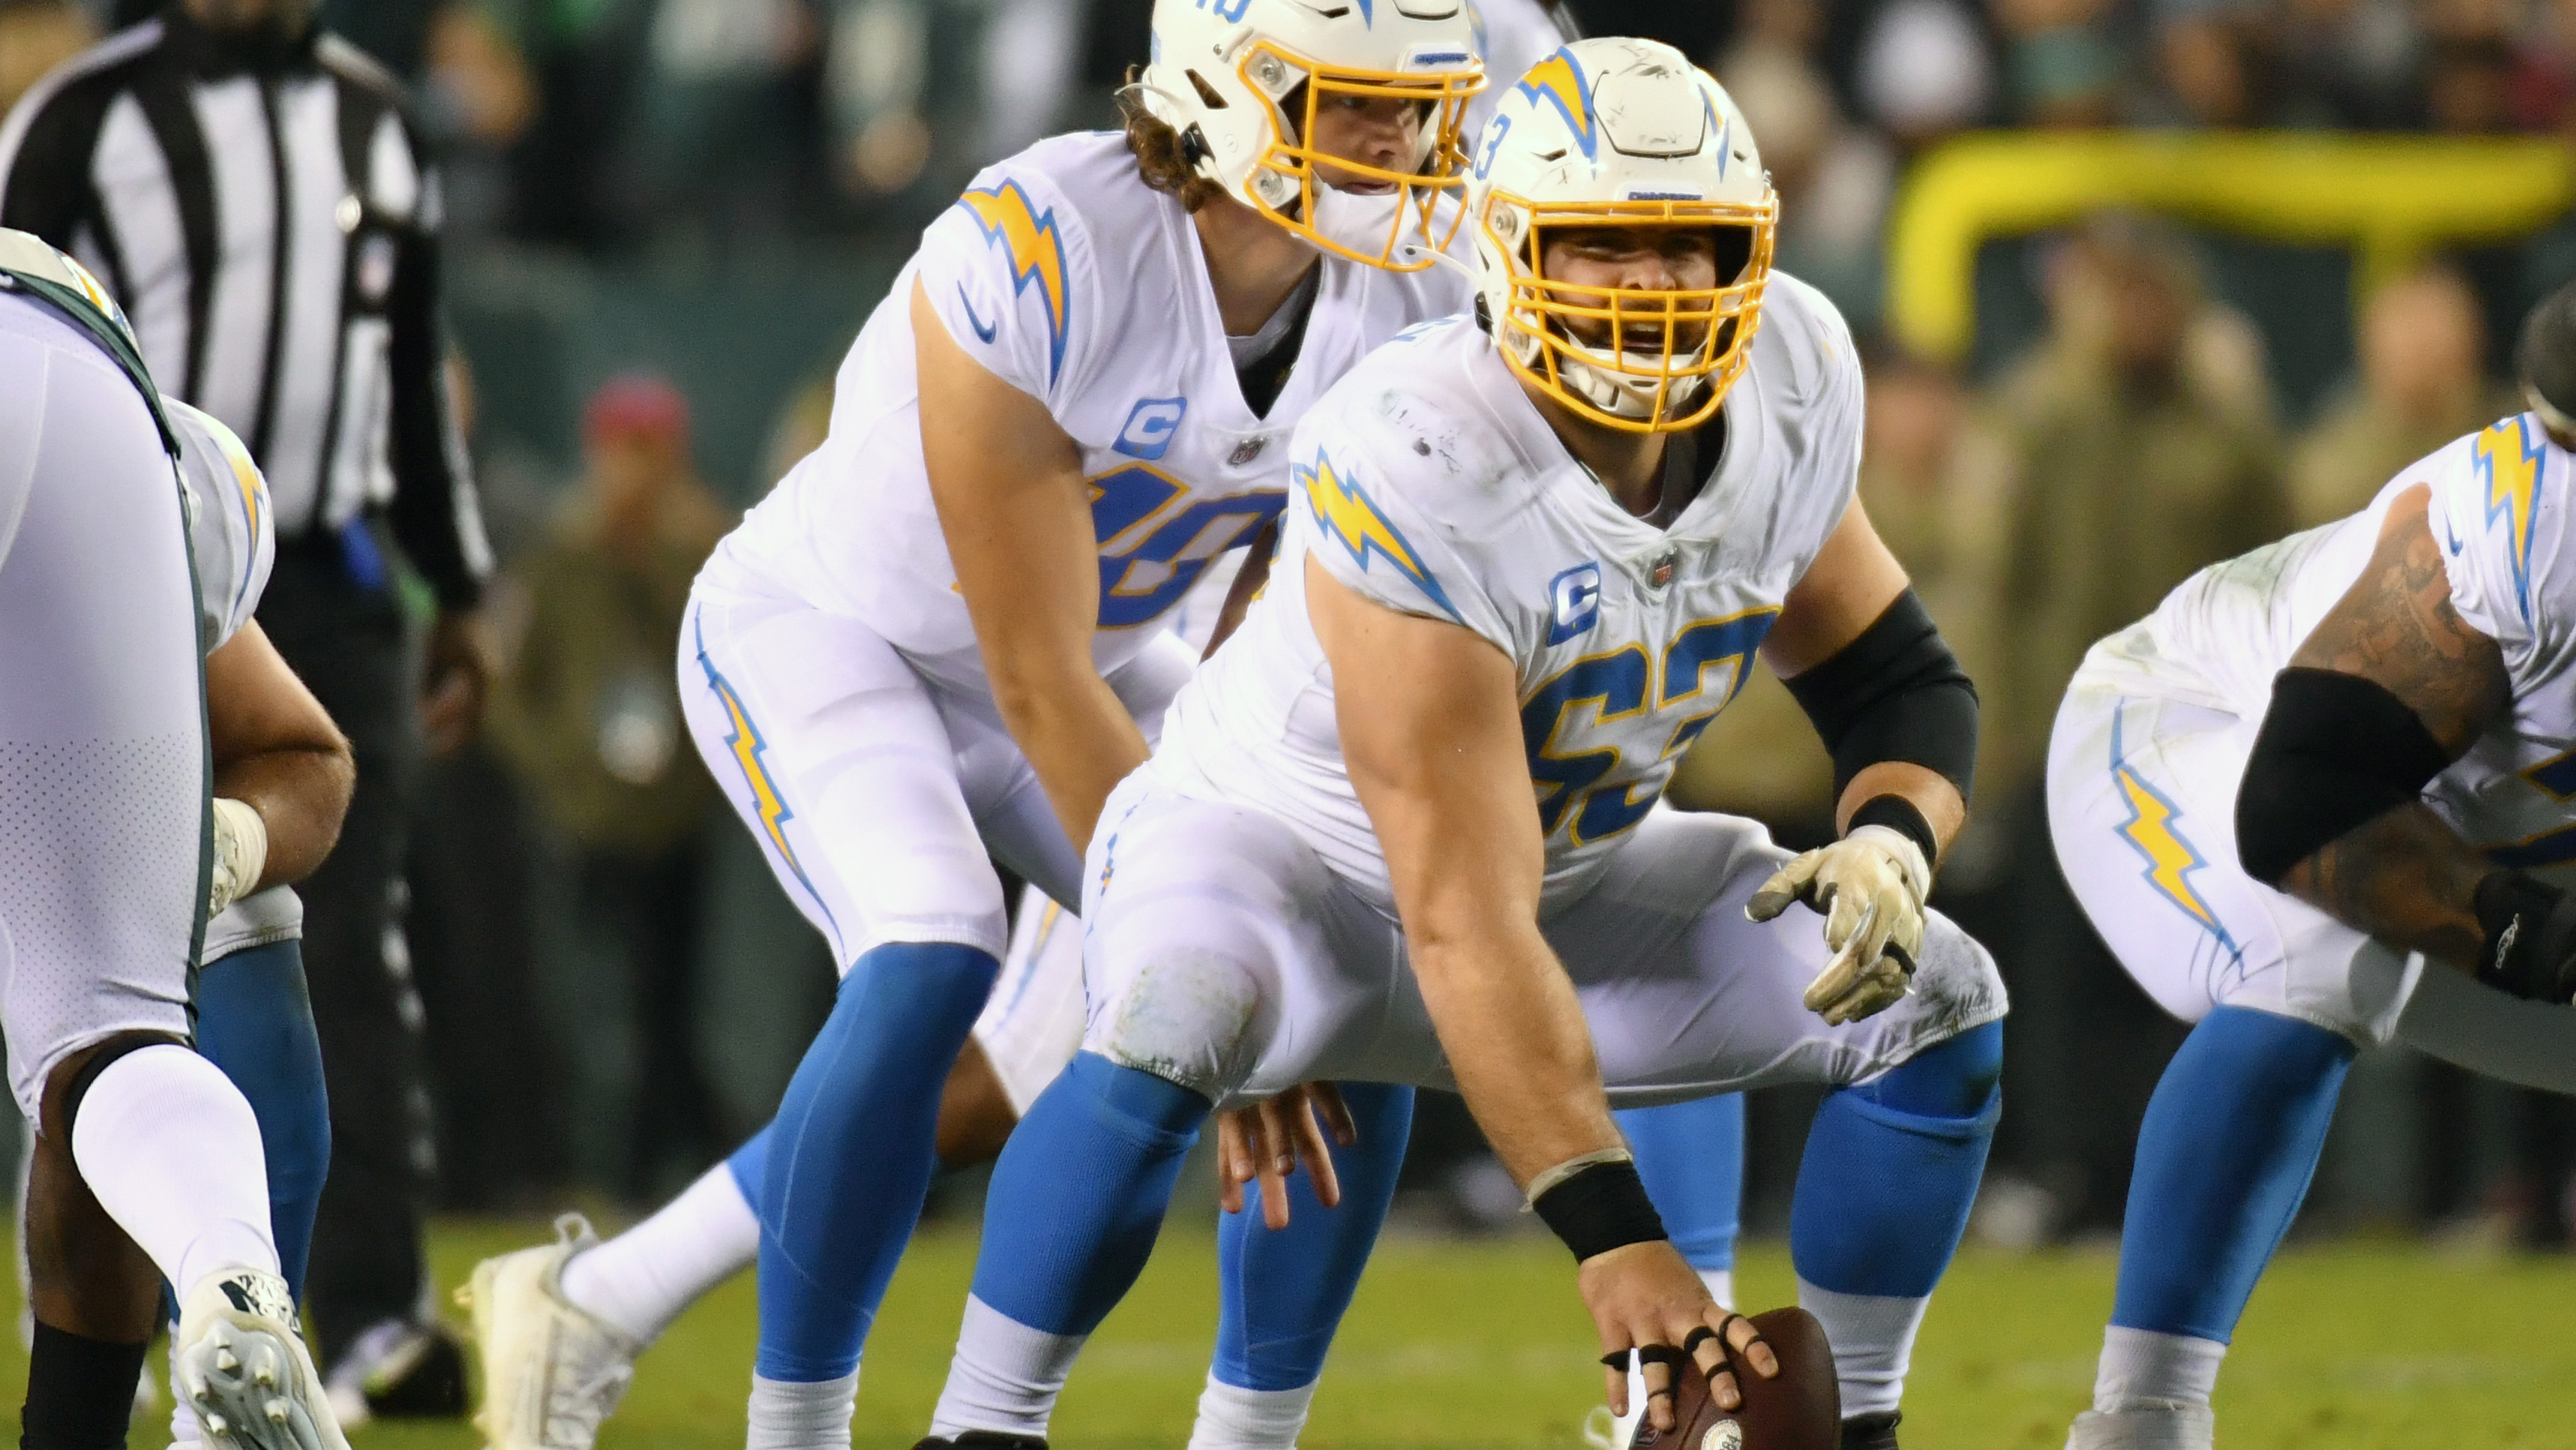 Los Angeles Chargers offensive lineman Corey Linsley delivers a snap to Justin Herbert